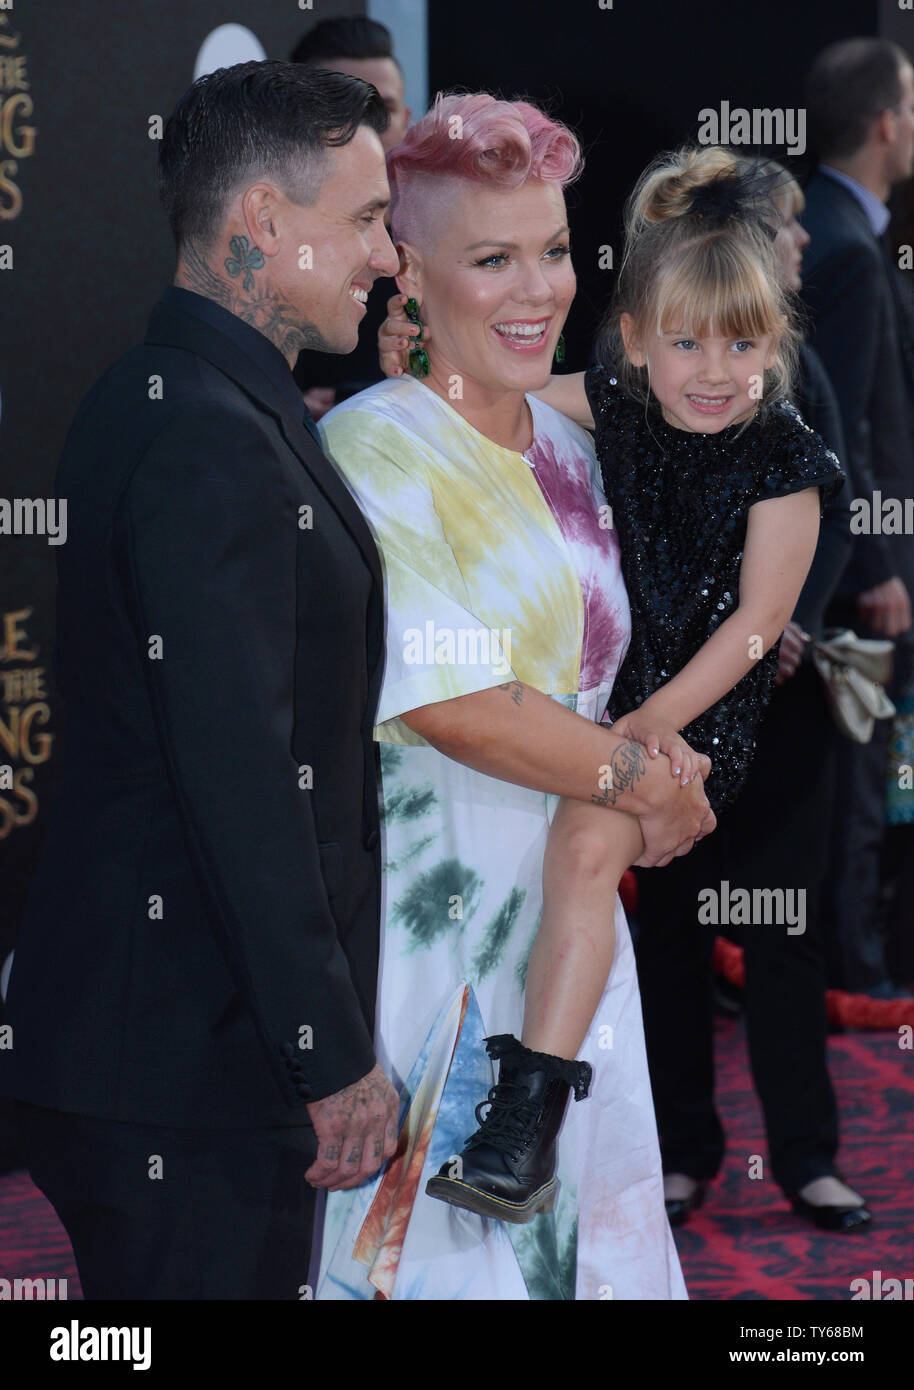 Singer and songwriter Pink, aka Alecia Moore, her husband, motorcycle racer Carey Hart and their daughter Willow Sage Hart attend the premiere of the motion picture fantasy 'Alice Through the Looking Glass' at the El Capitan Theatre in the Hollywood section of Los Angeles on May 23, 2016. Storyline: Nineteen-year-old Alice returns to the magical world from her childhood adventure, where she reunites with her old friends and learns of her true destiny: to end the Red Queen's reign of terror.  Photo by Jim Ruymen/UPI Stock Photo